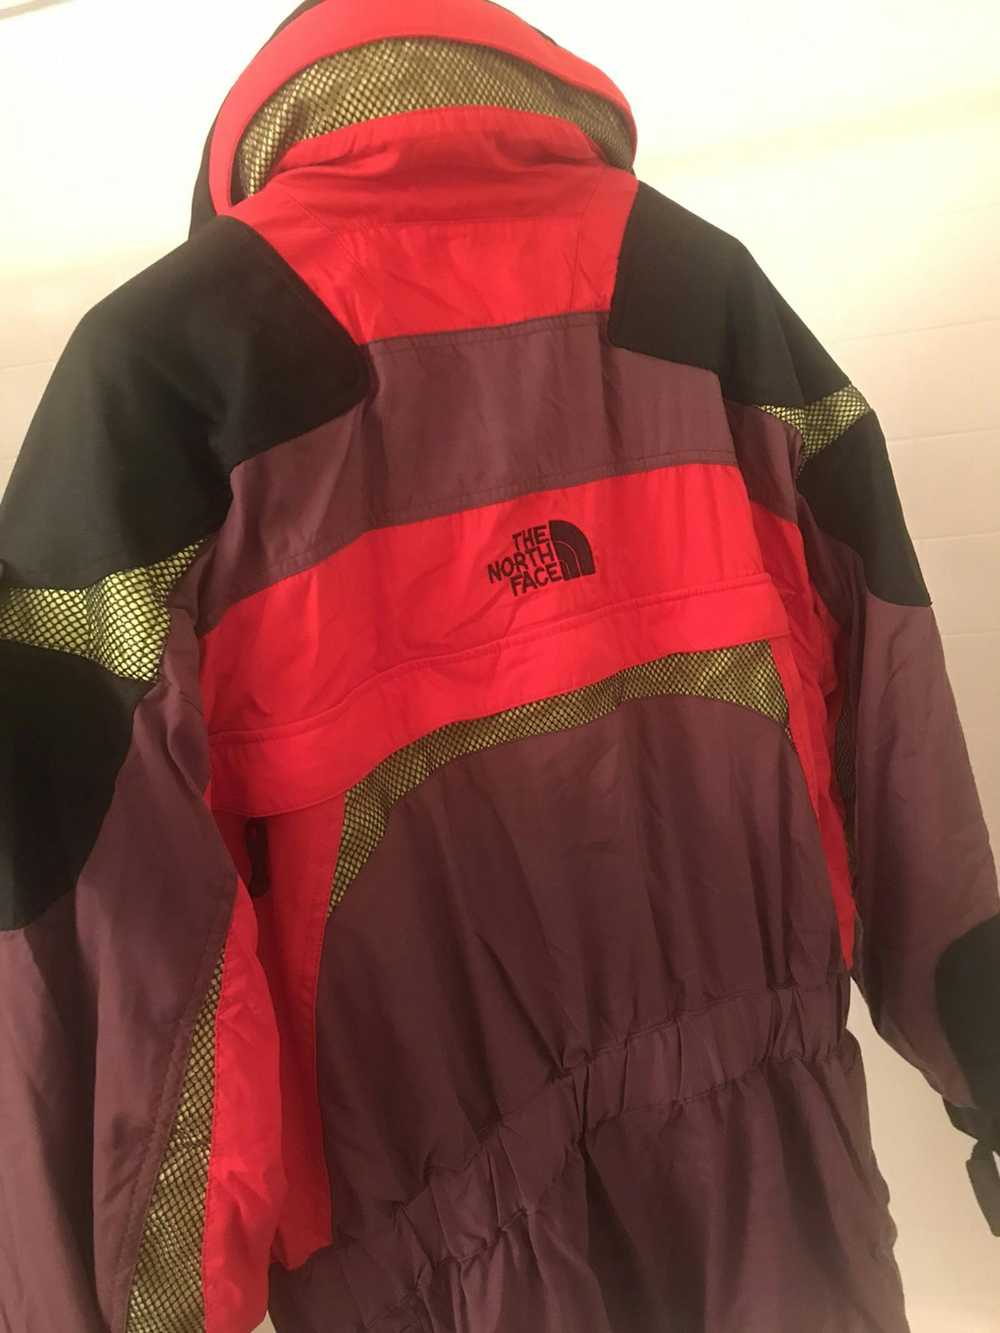 The North Face TNF Gore-Tex Jacket - image 3